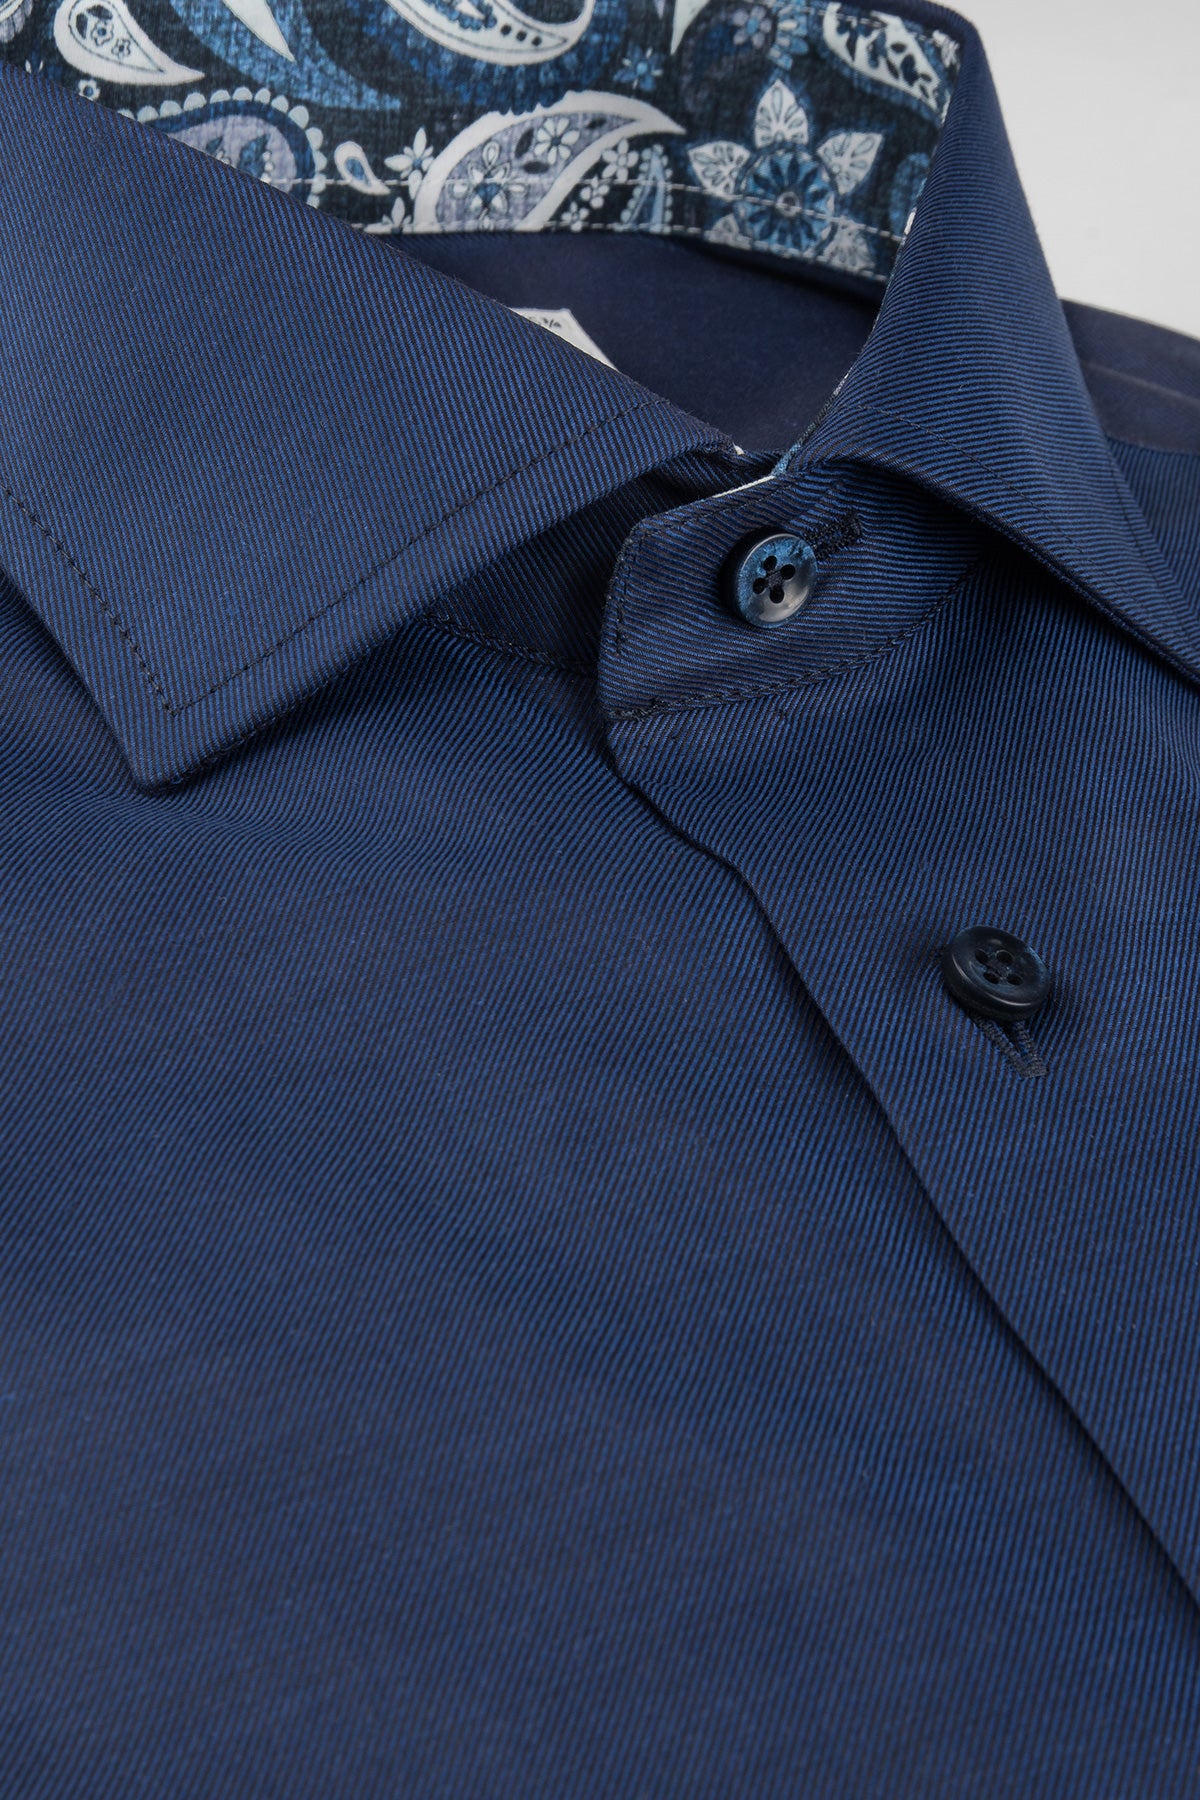 Navy blue slim fit shirt with contrast details